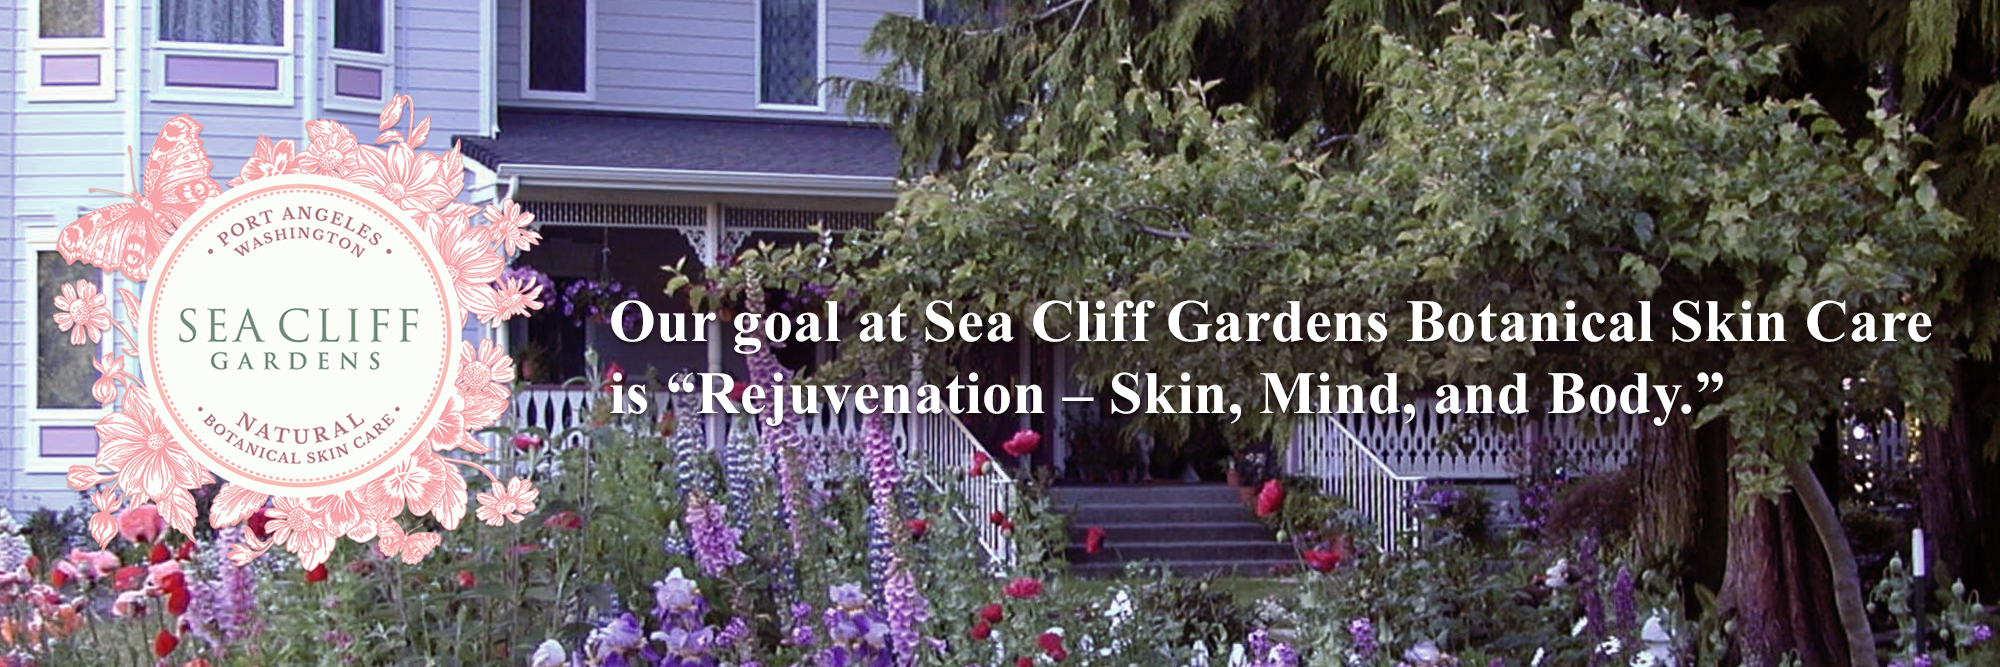 Our goal is "Rejuvenation - Skin, Mind, and Body."